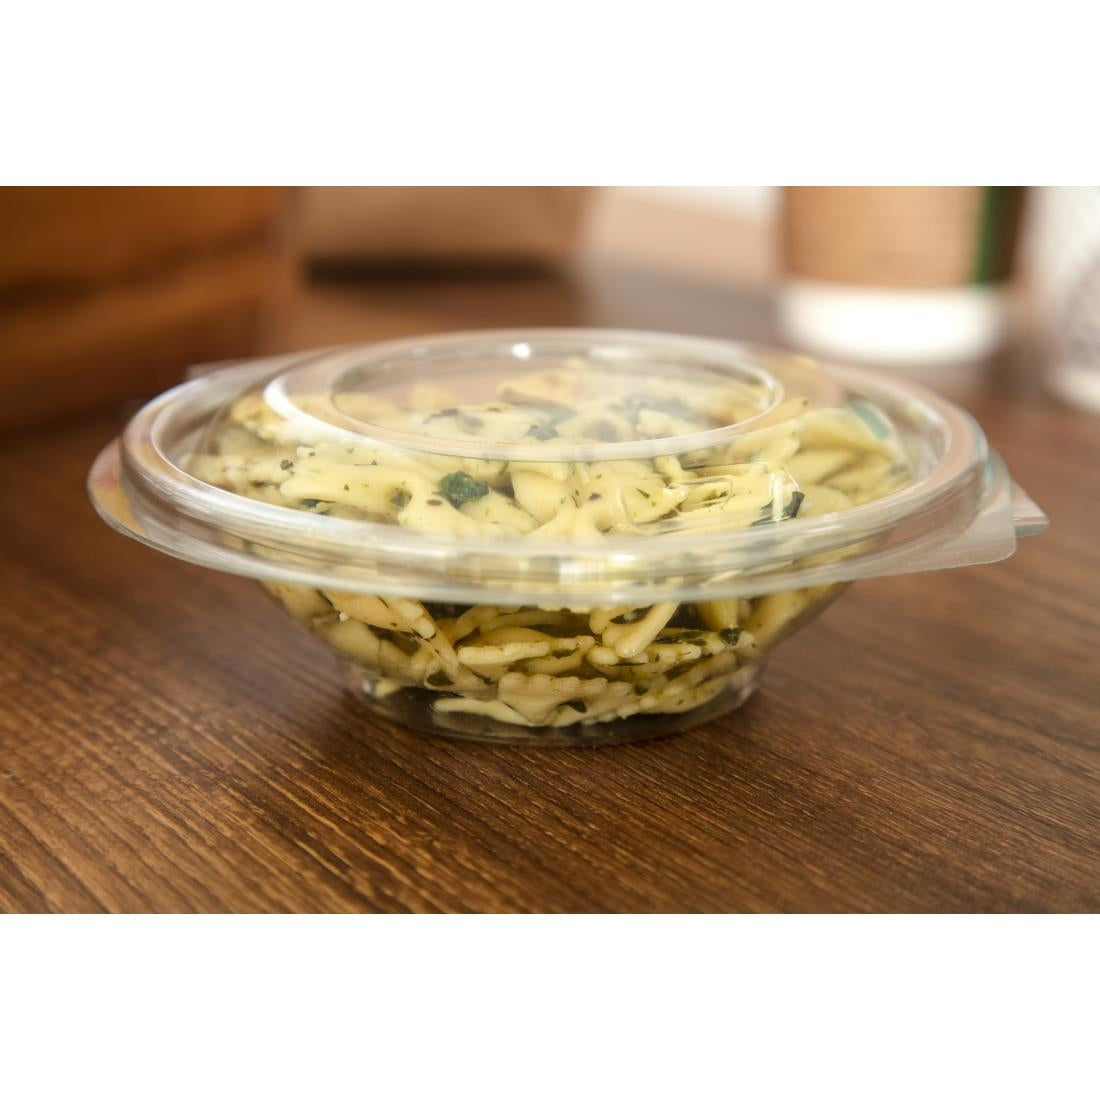 Faerch Contour Recyclable Deli Bowls With Lid JD Catering Equipment Solutions Ltd